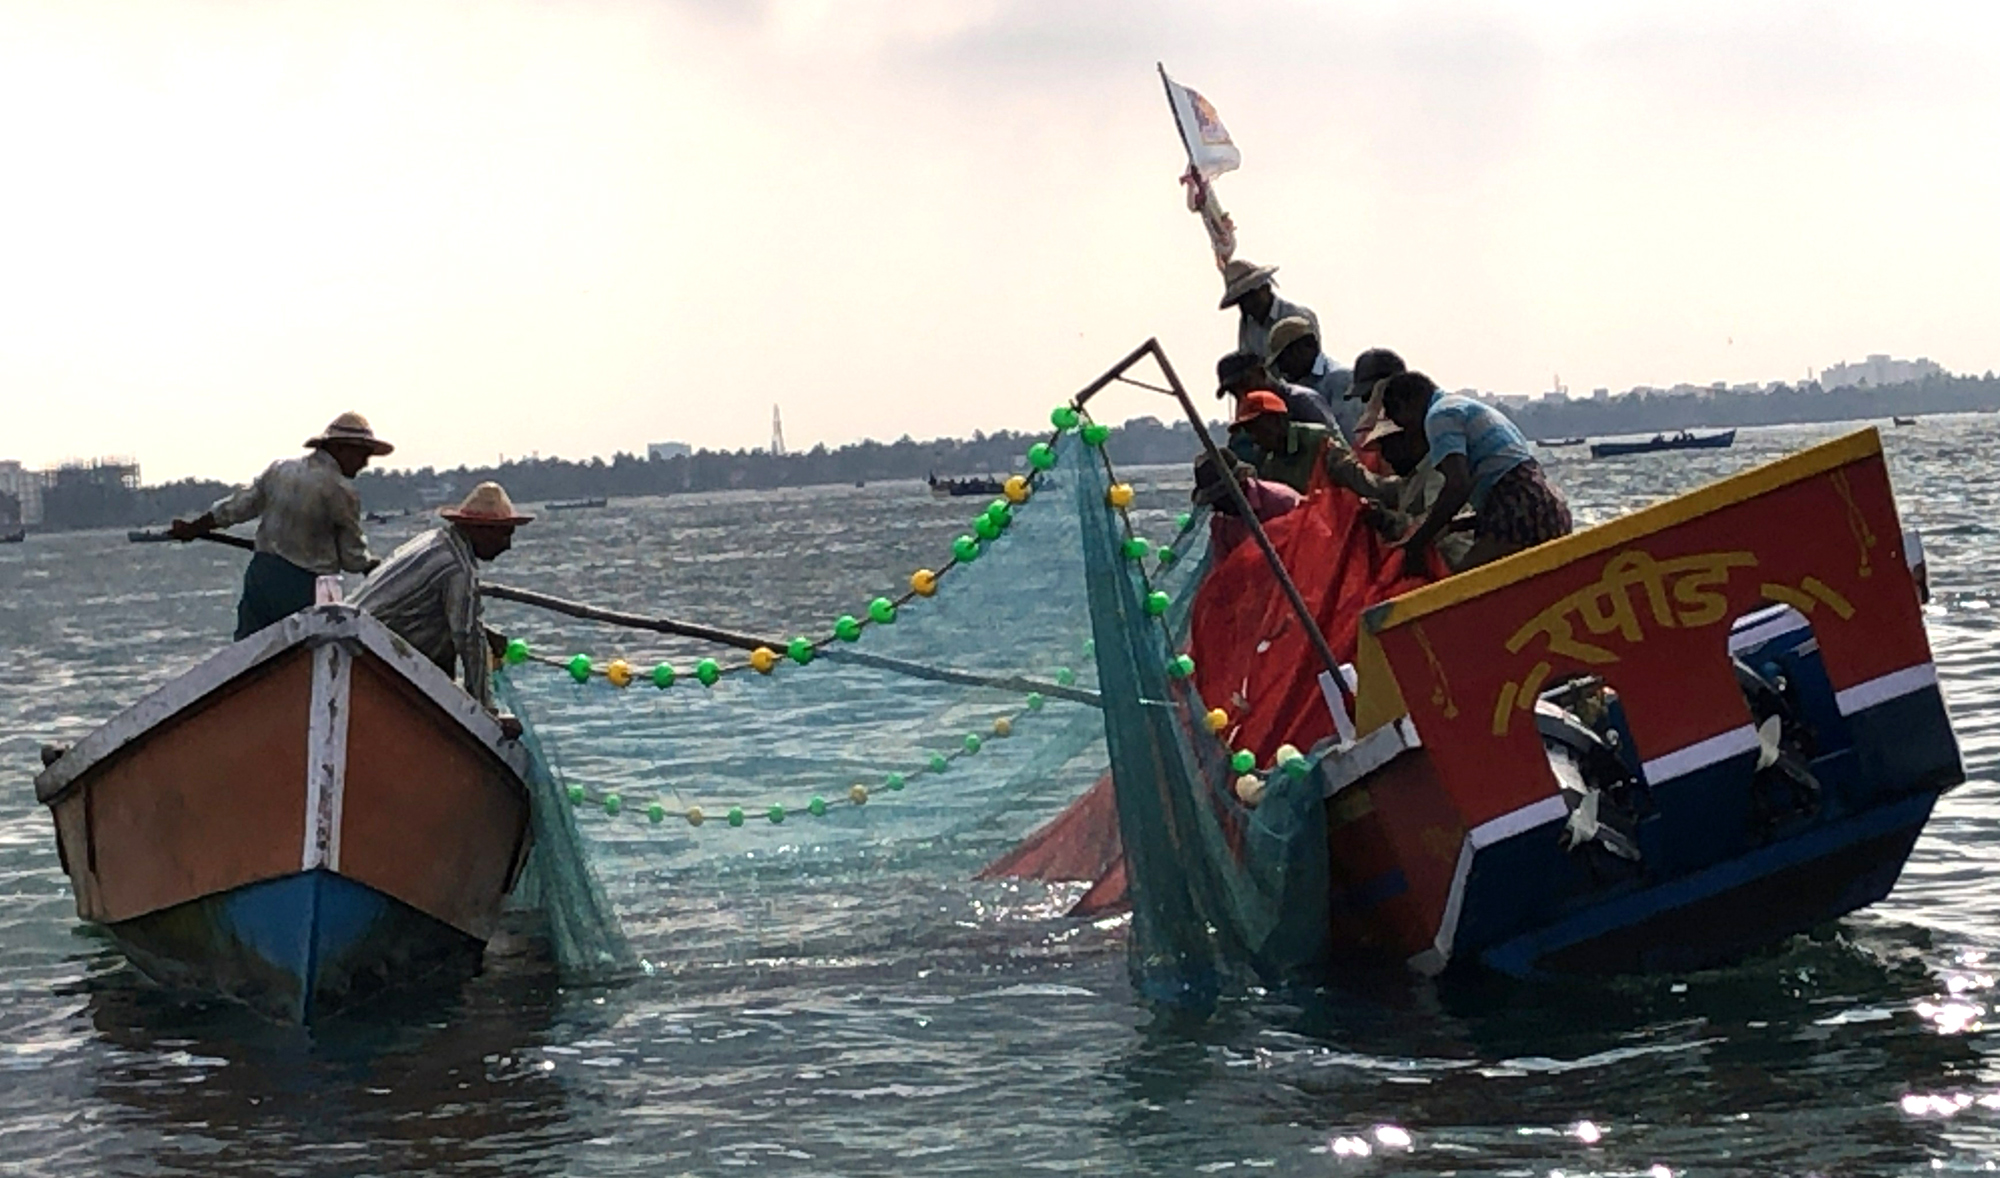 Two small boats are next to each other in the water, connected by ropes